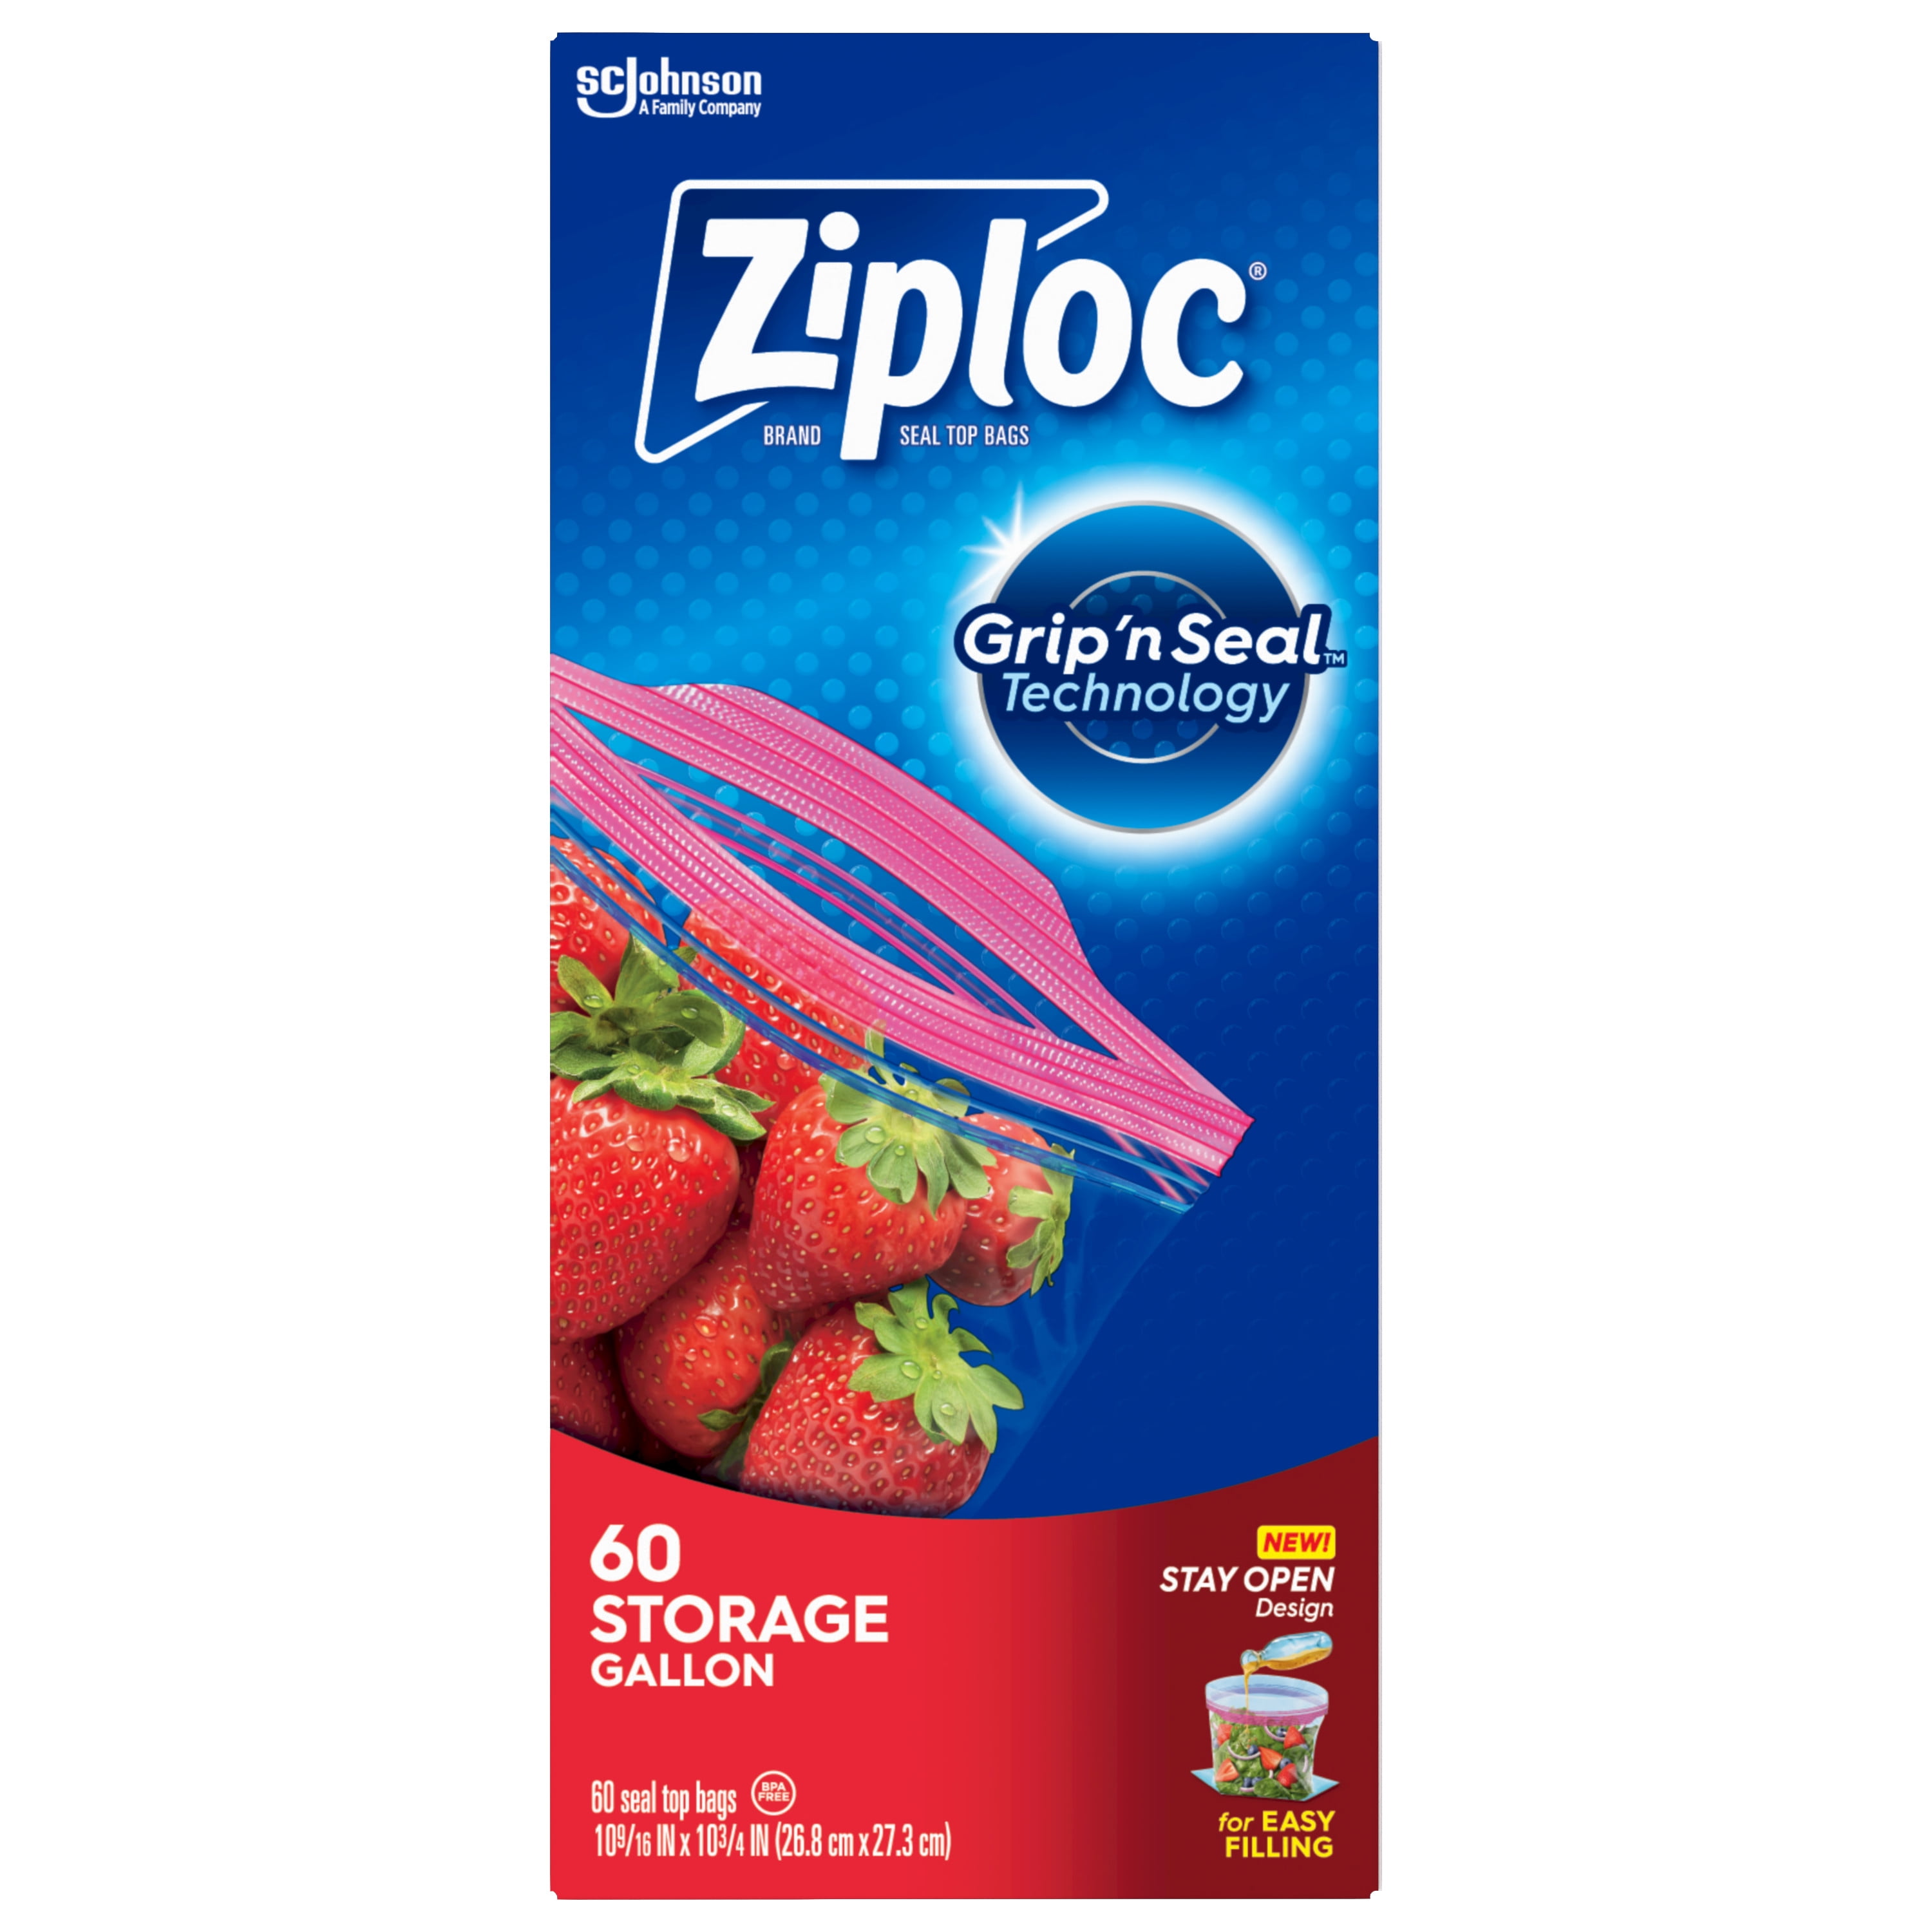 Ziploc® Brand Storage Bags with New Stay Open Design, Gallon, 60 Count ...